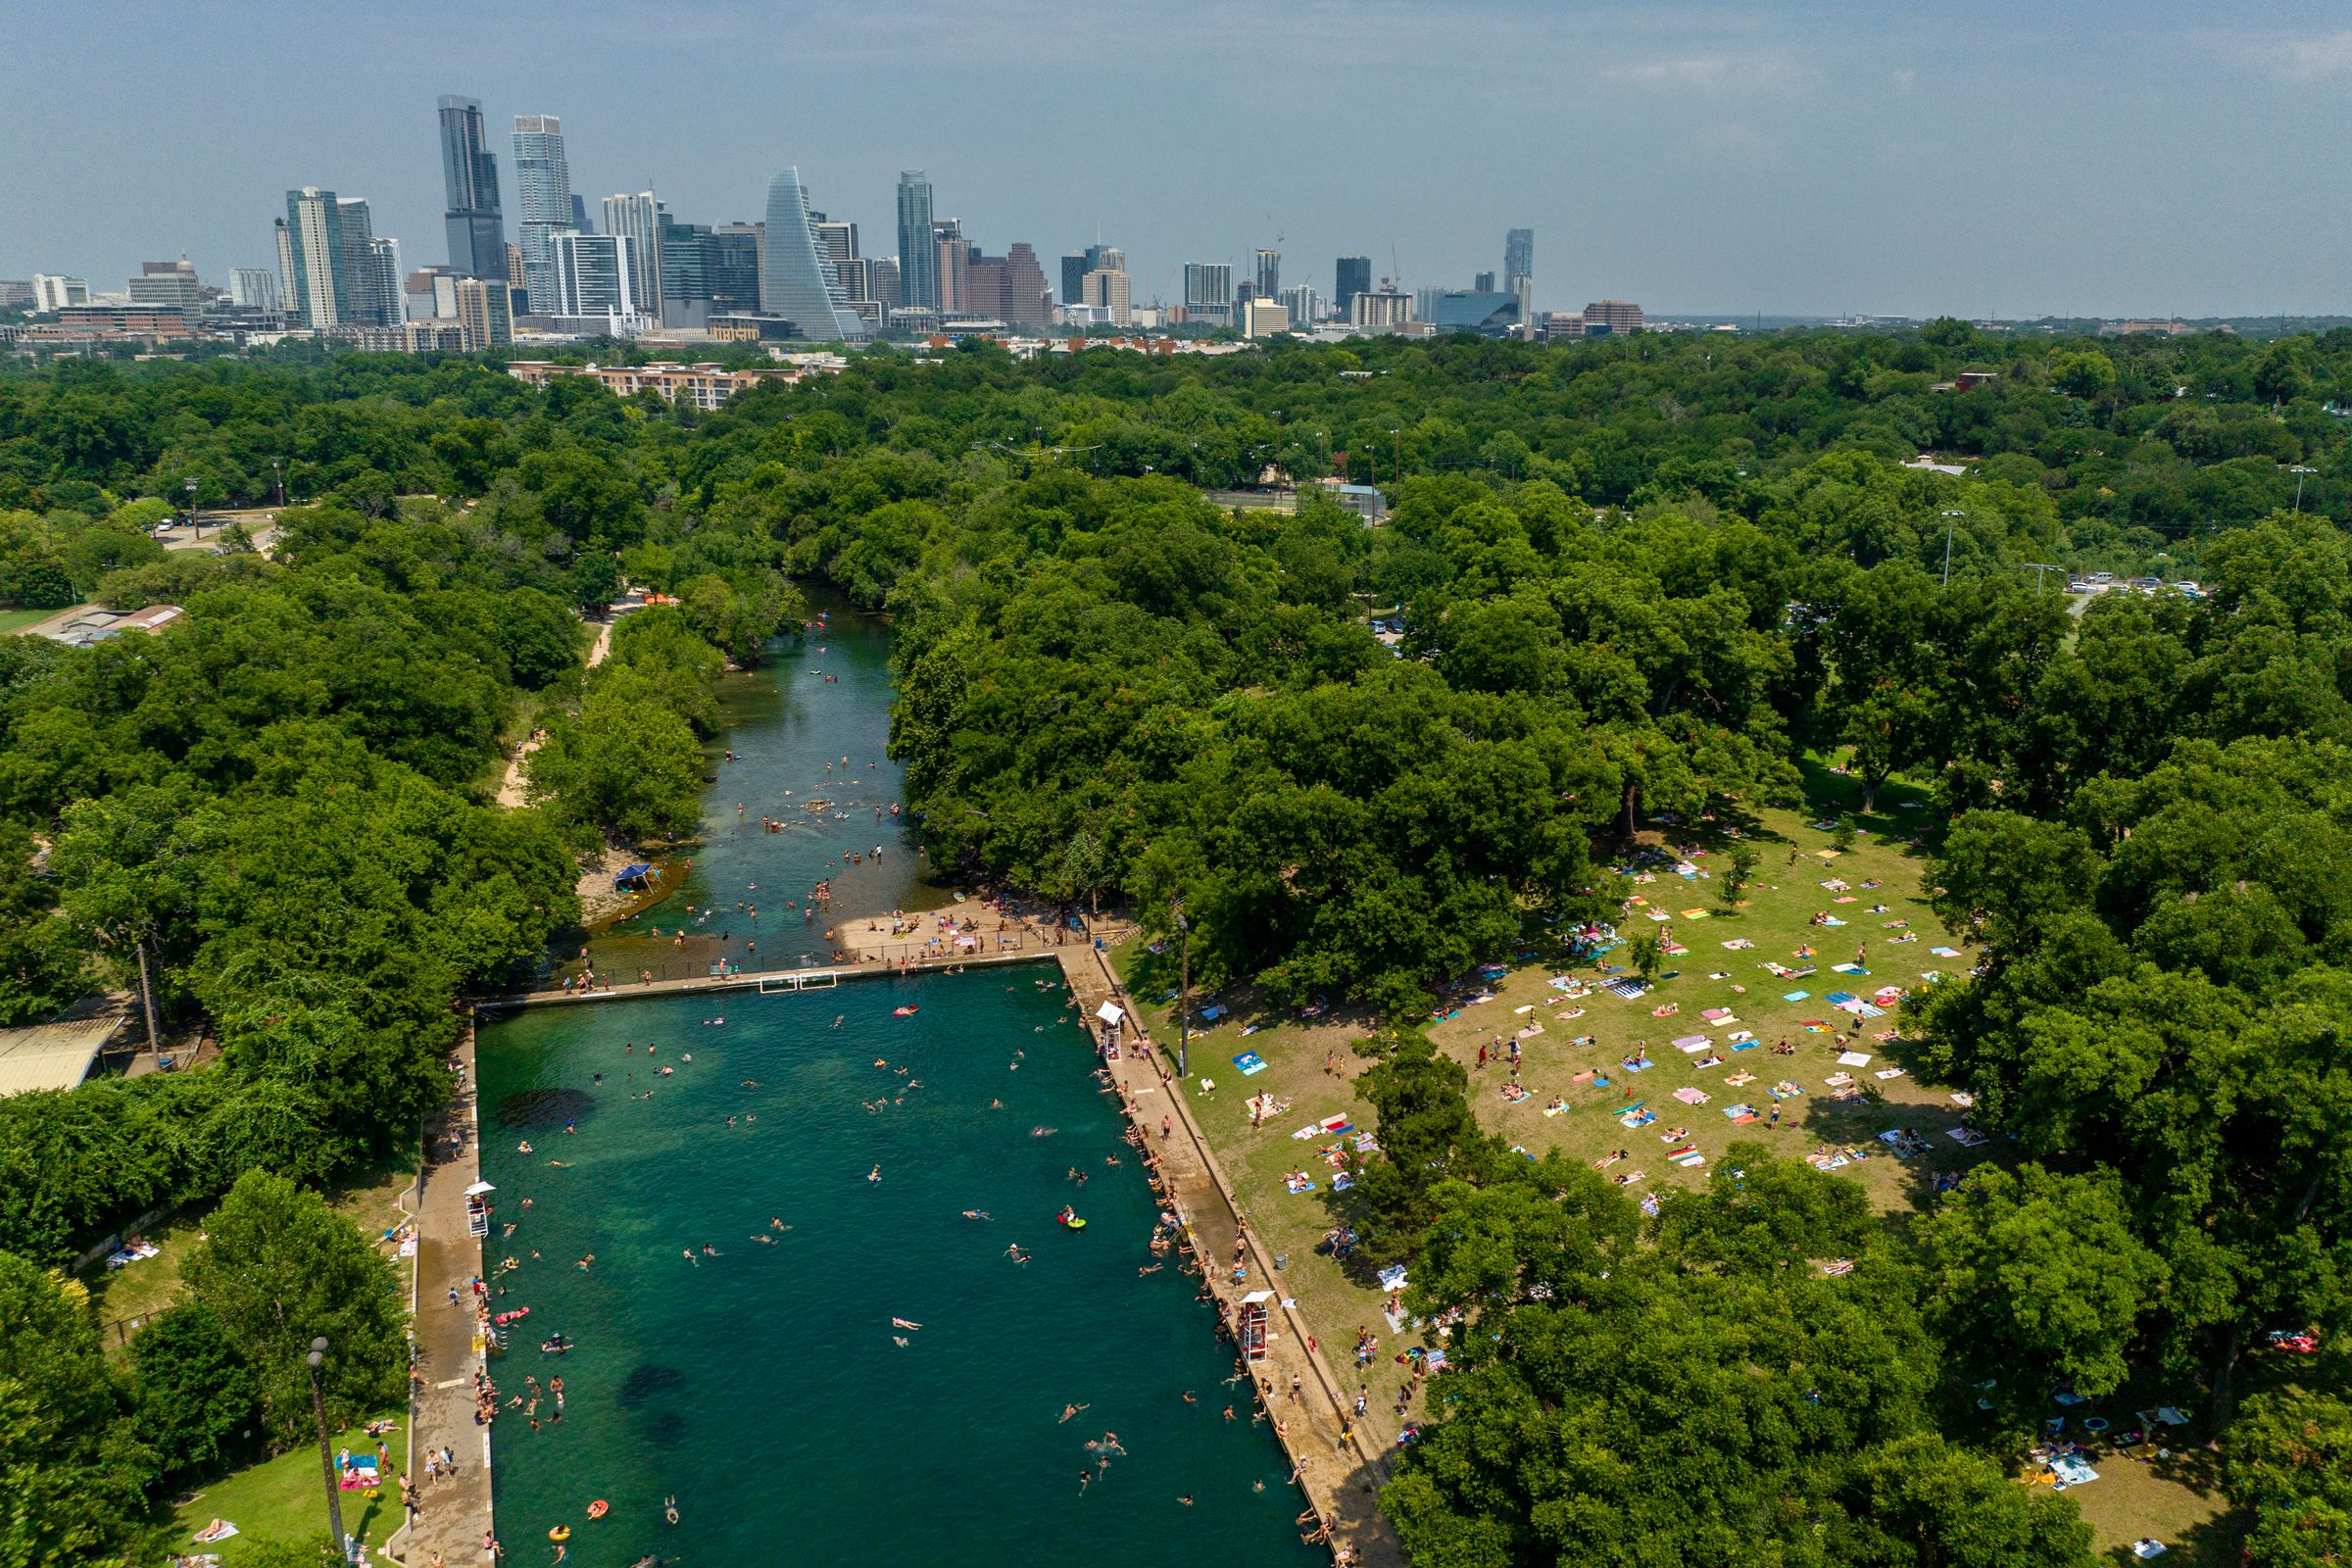 An aerial photograph of the Austin skyline next to a large, green park with a pool.